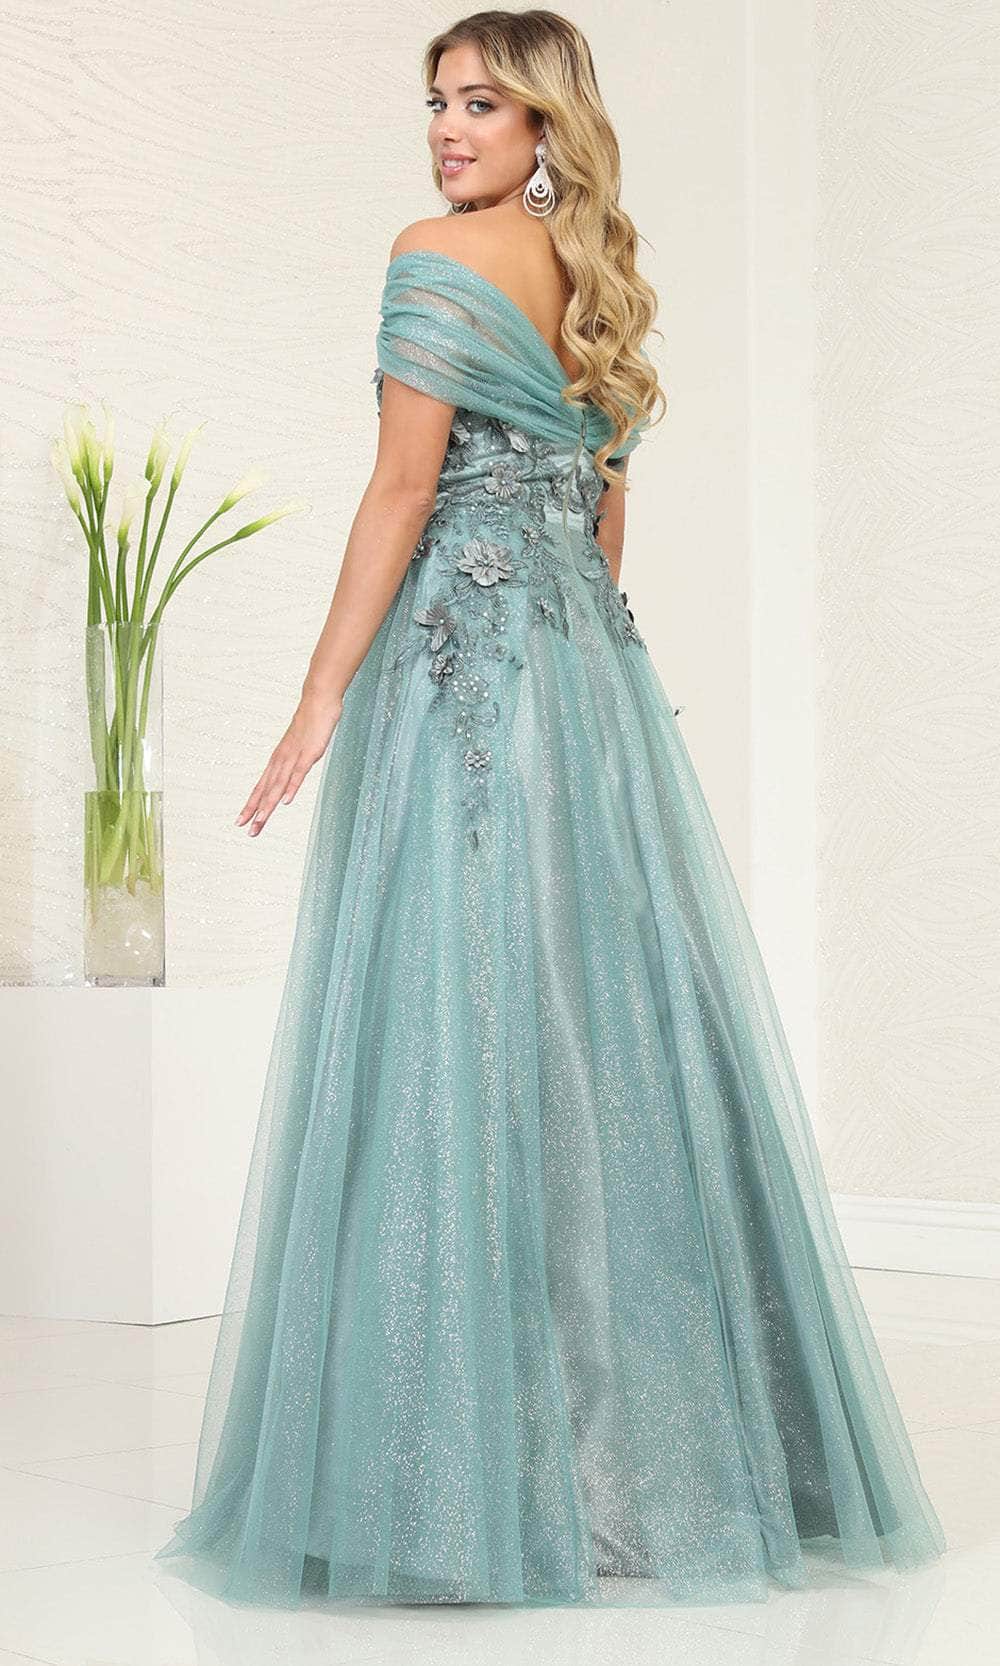 May Queen RQ8109 - Sweetheart A-Line Prom Gown Prom Dresses